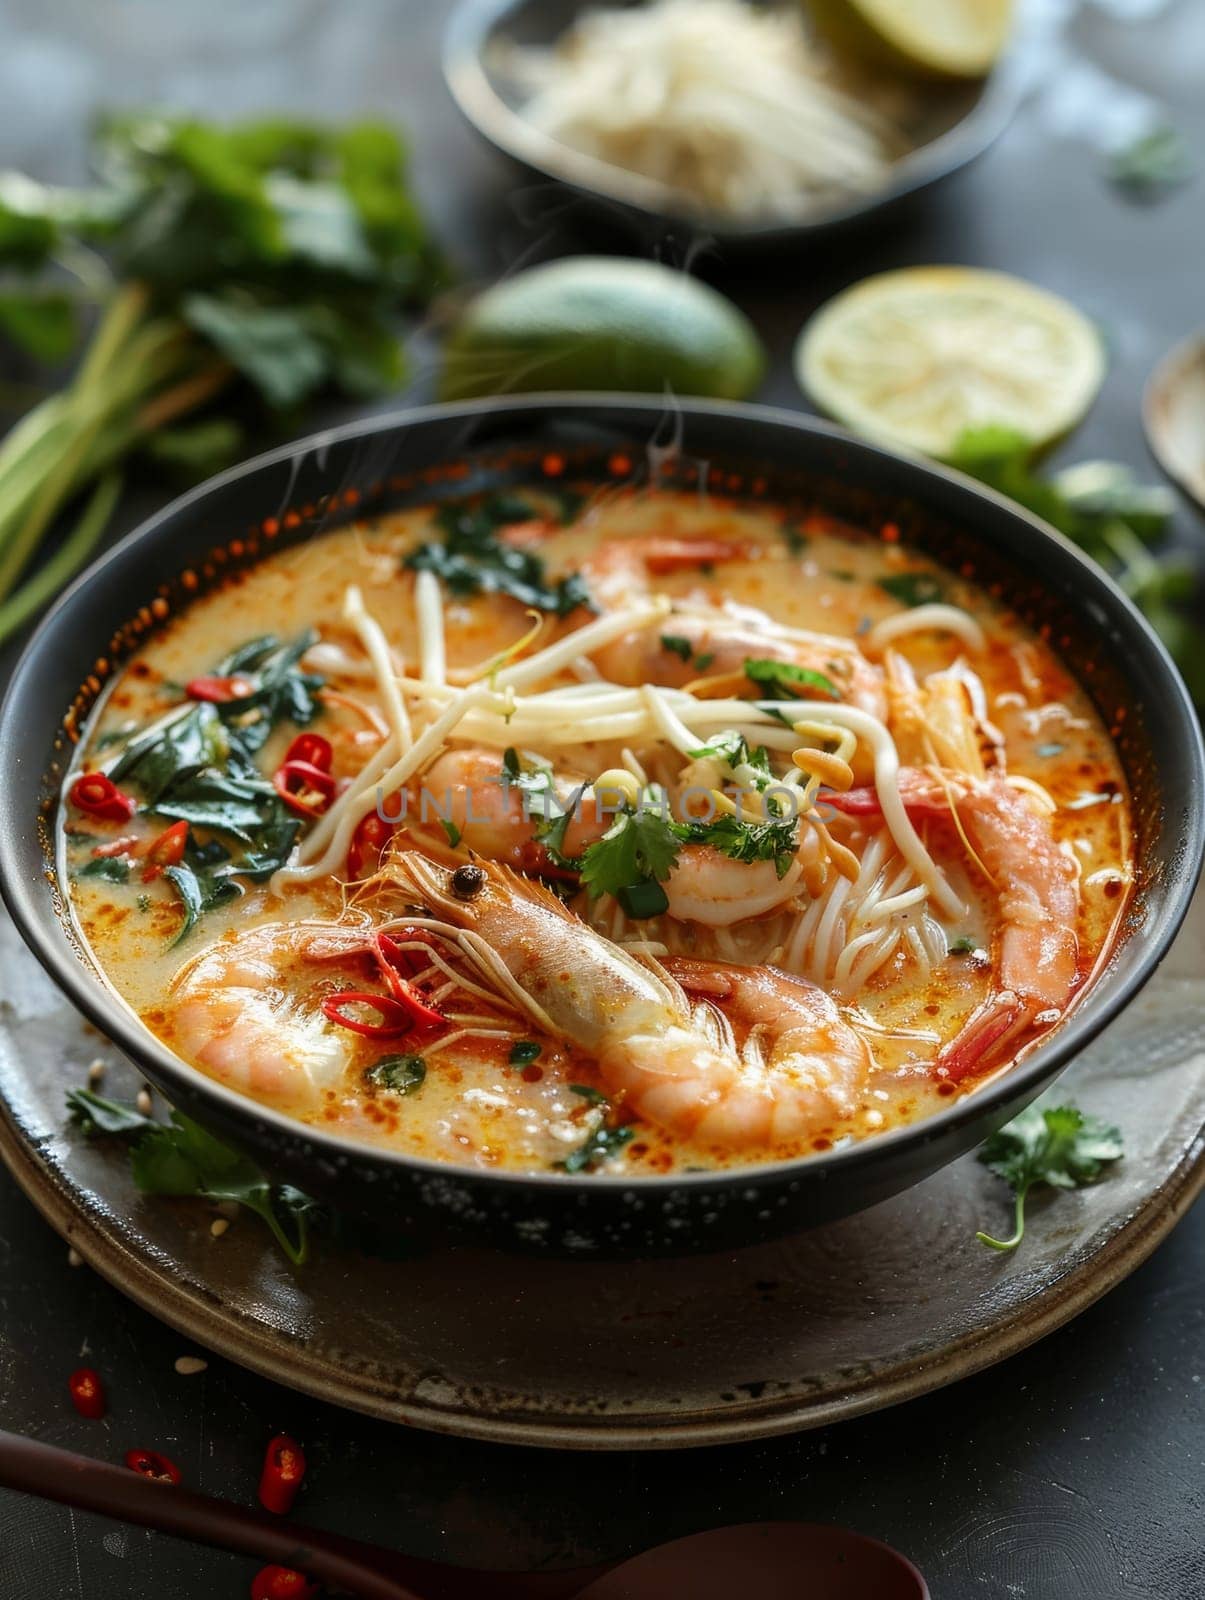 Authentic Myanmar mohinga, a traditional fish broth soup with rice noodles, lemongrass, and an array of fresh herbs and spices. This comforting, savory dish showcases the vibrant flavors of Asian. by sfinks